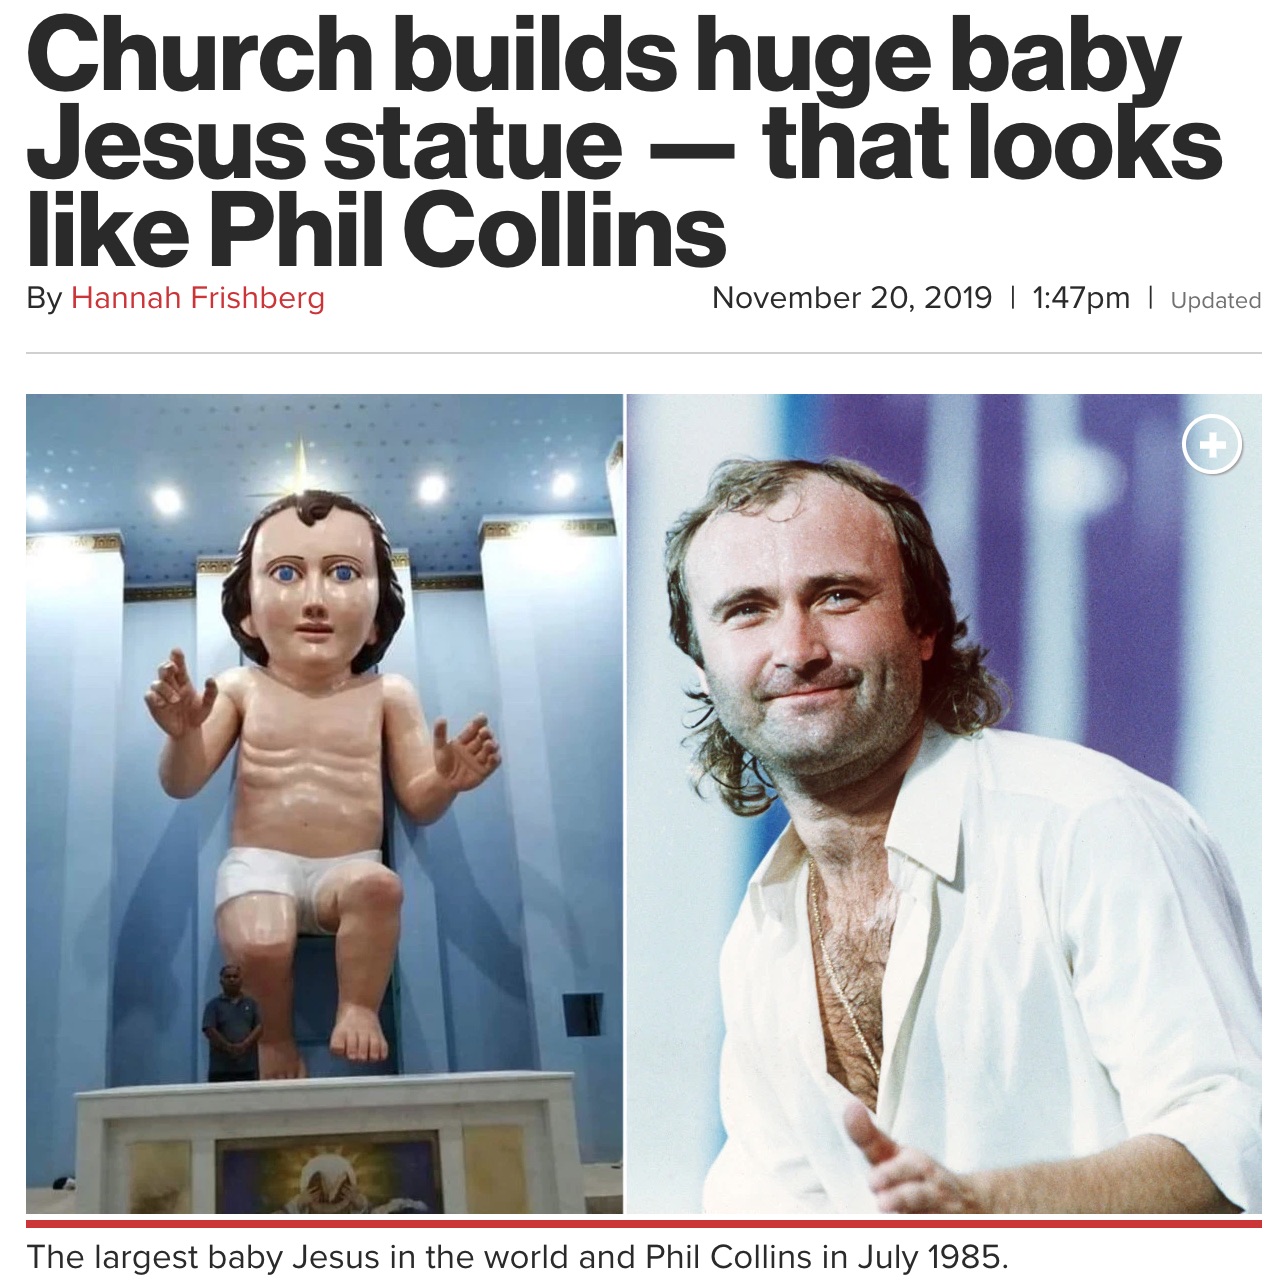 baby jesus phil collins - Church builds huge baby Jesus statue that looks Phil Collins By Hannah Frishberg | pm | Updated The largest baby Jesus in the world and Phil Collins in .